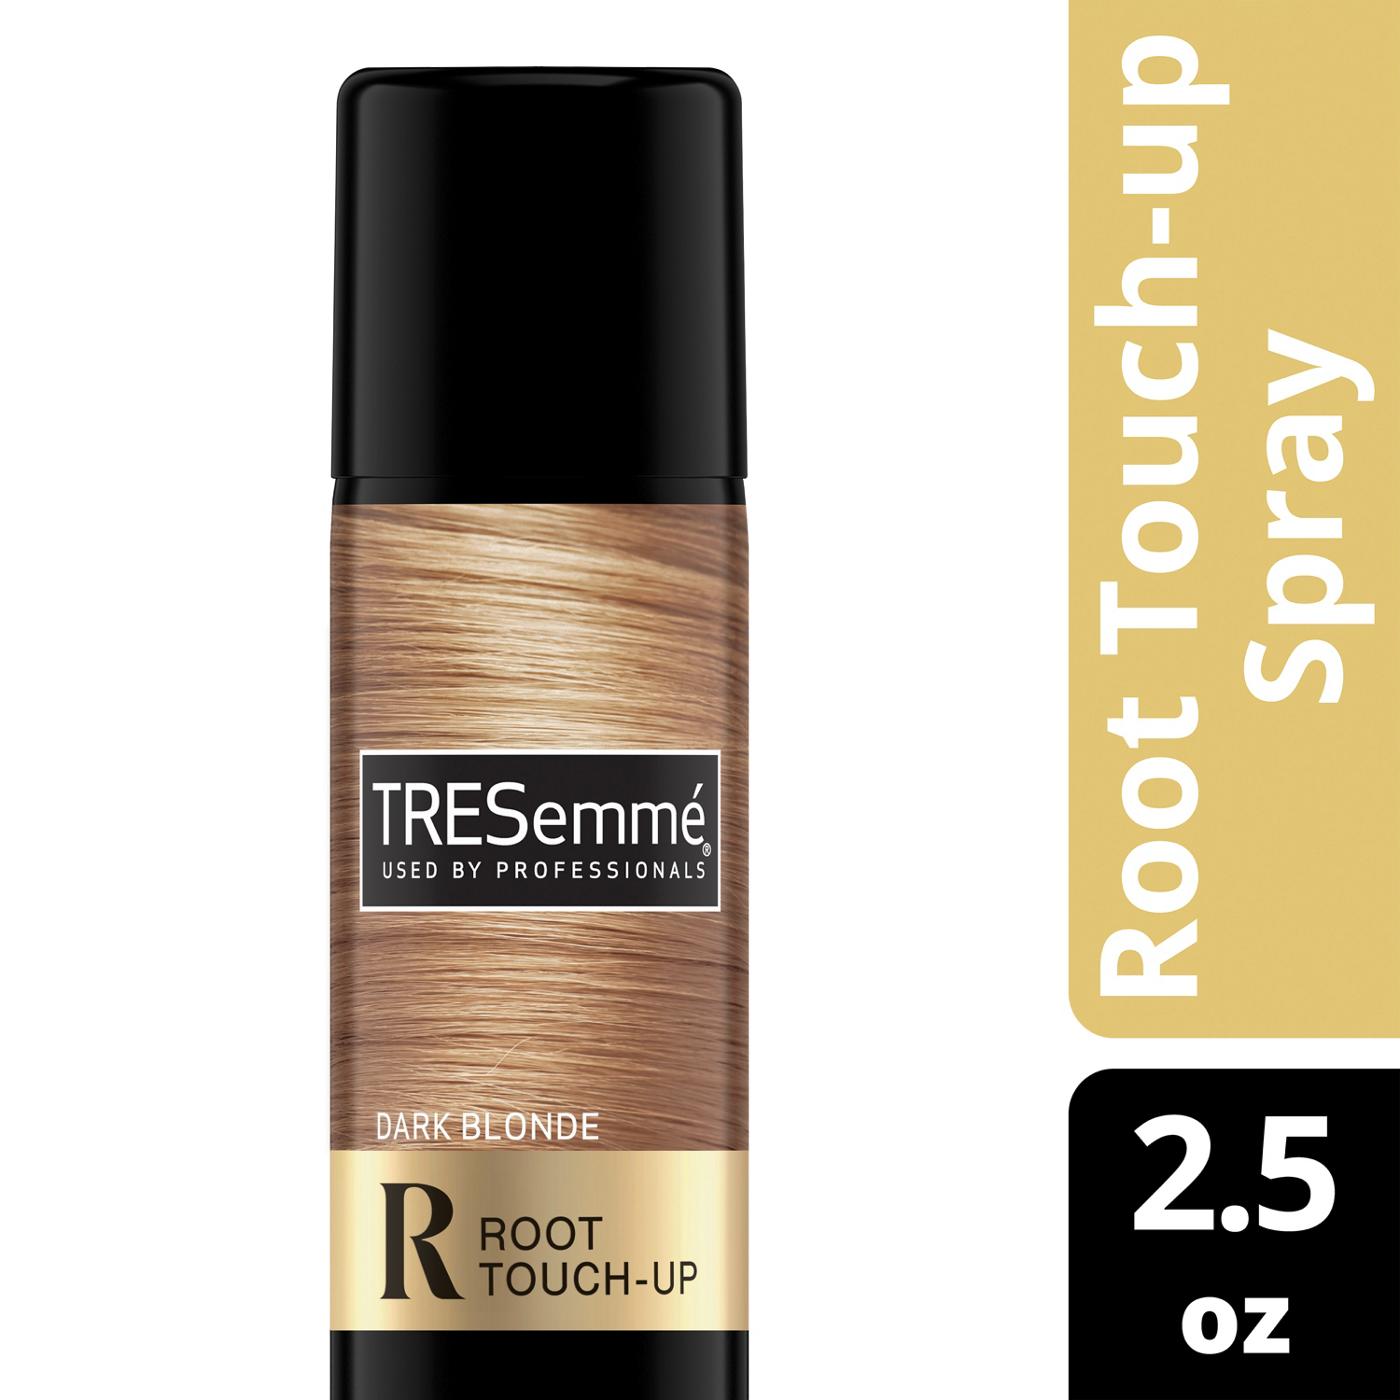 TRESemmé Root Touch Up Temporary Hair Color - Dark Blonde; image 2 of 4